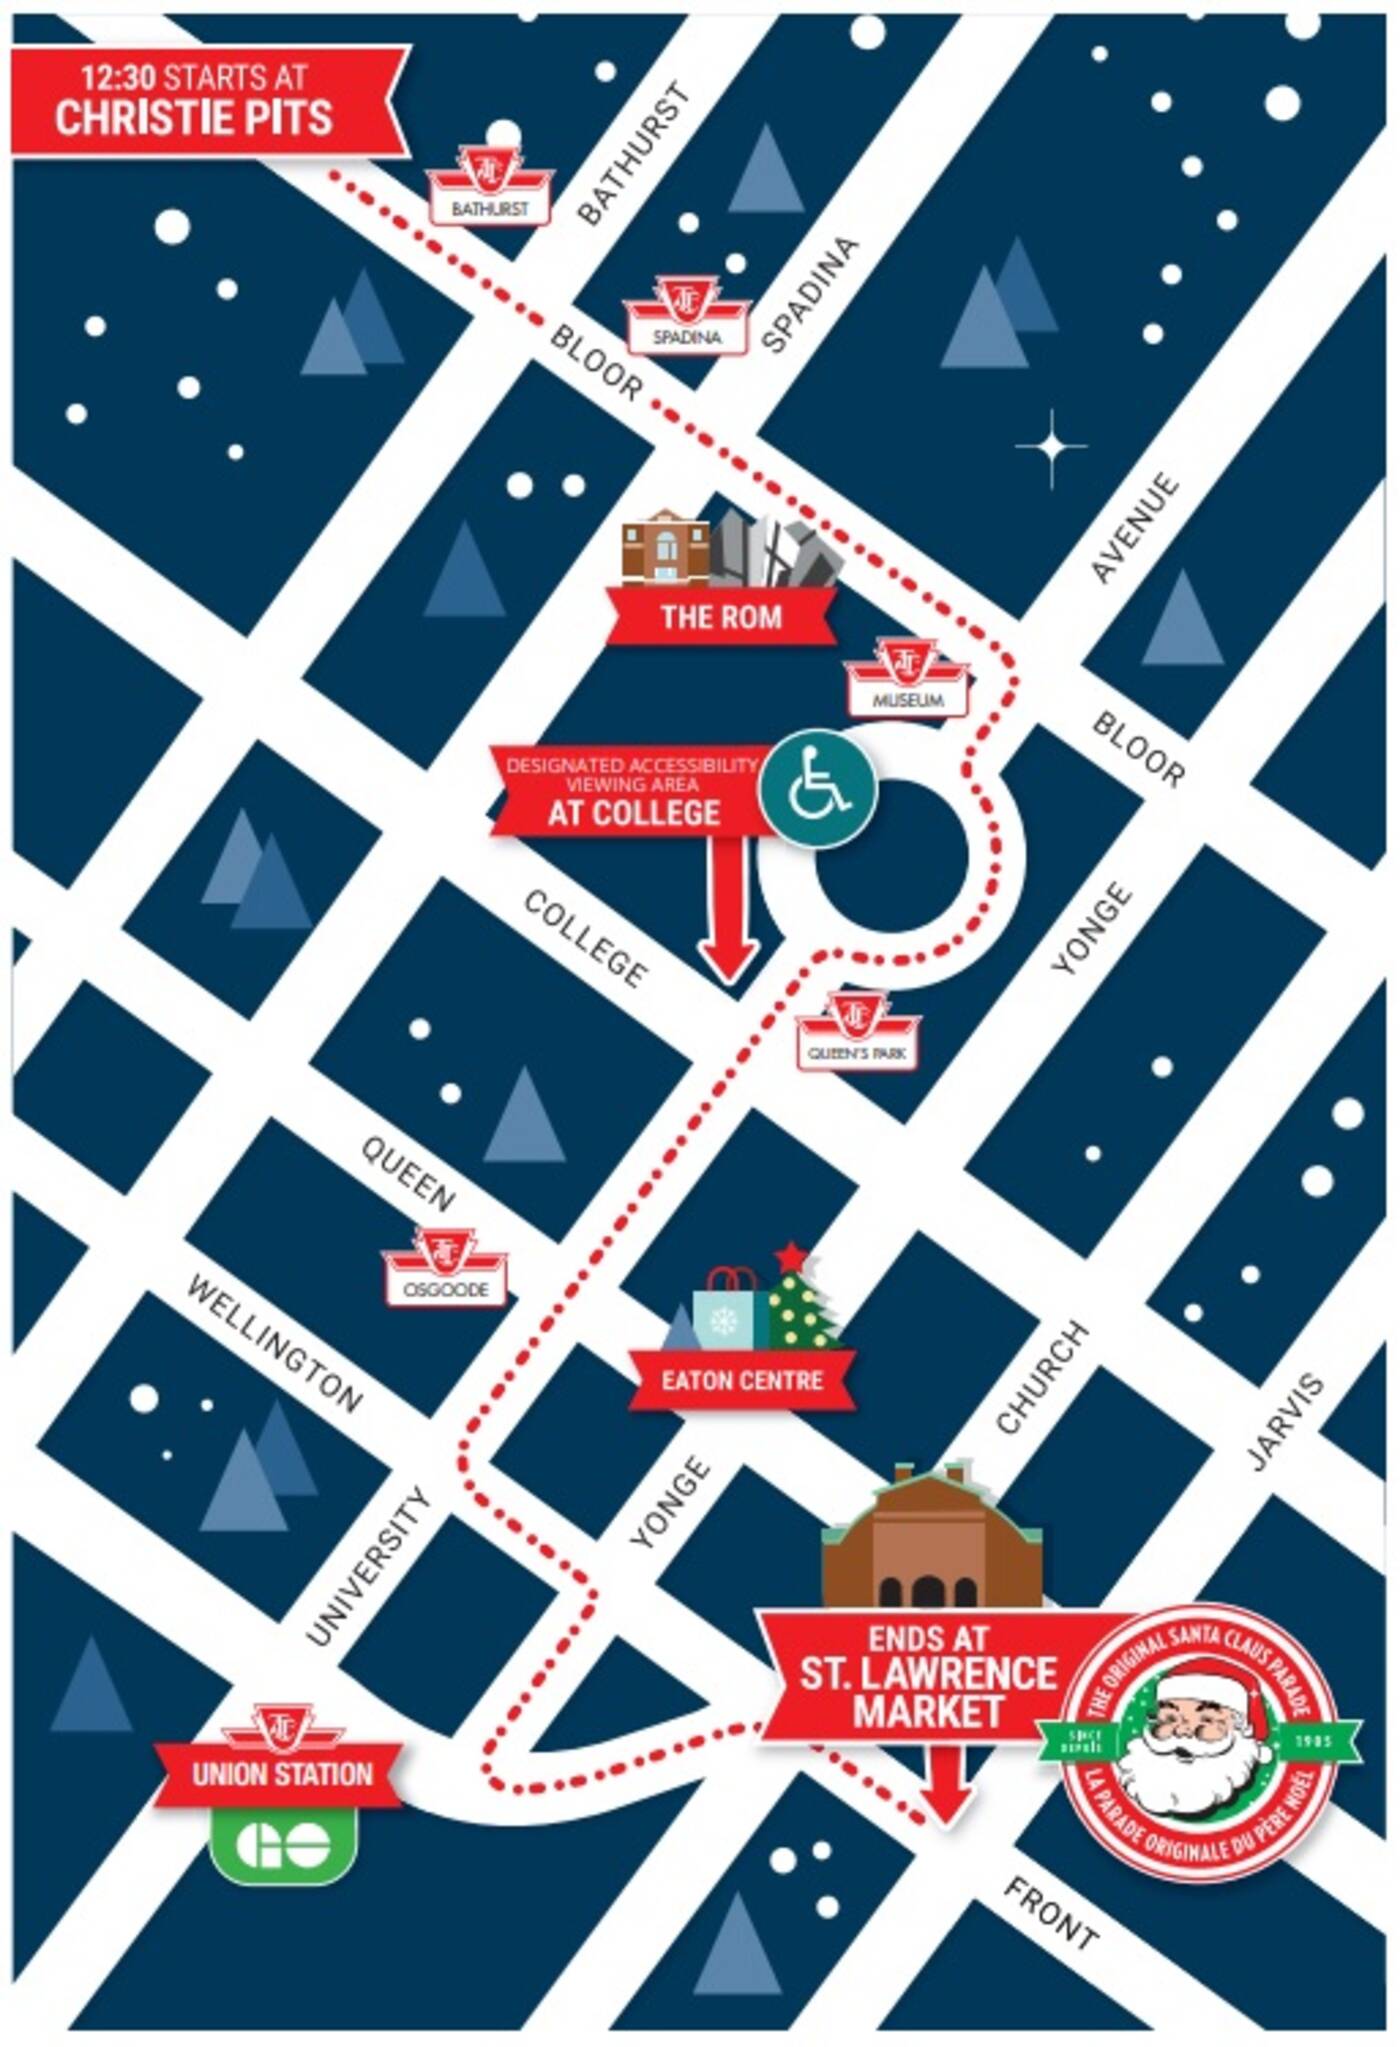 Santa Claus Parade route and road closures in Toronto for 2022